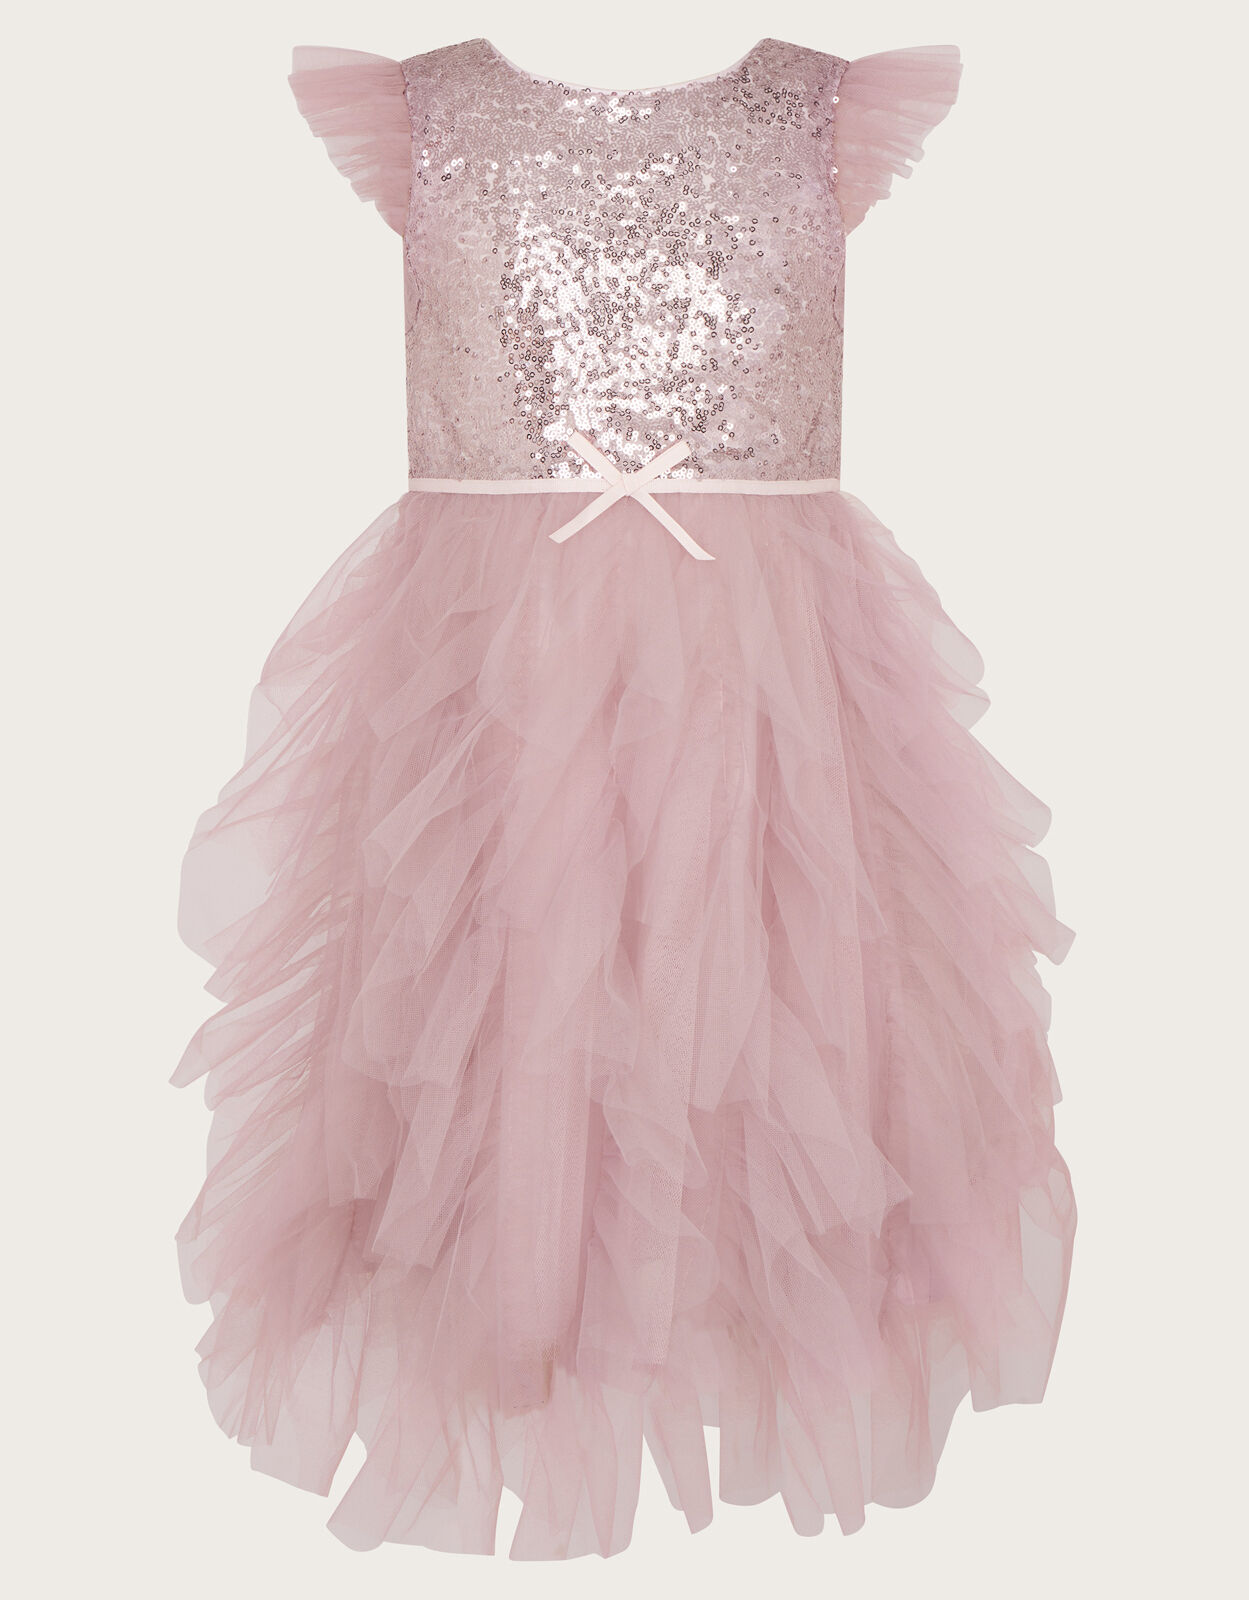 LaLamira-Beautiful Pageant Dresses Flower Girl Dresses Birthday Party  Dresses Ball-Gown Tulle Lace | Girls dresses, Girls formal dresses, Ball  dresses